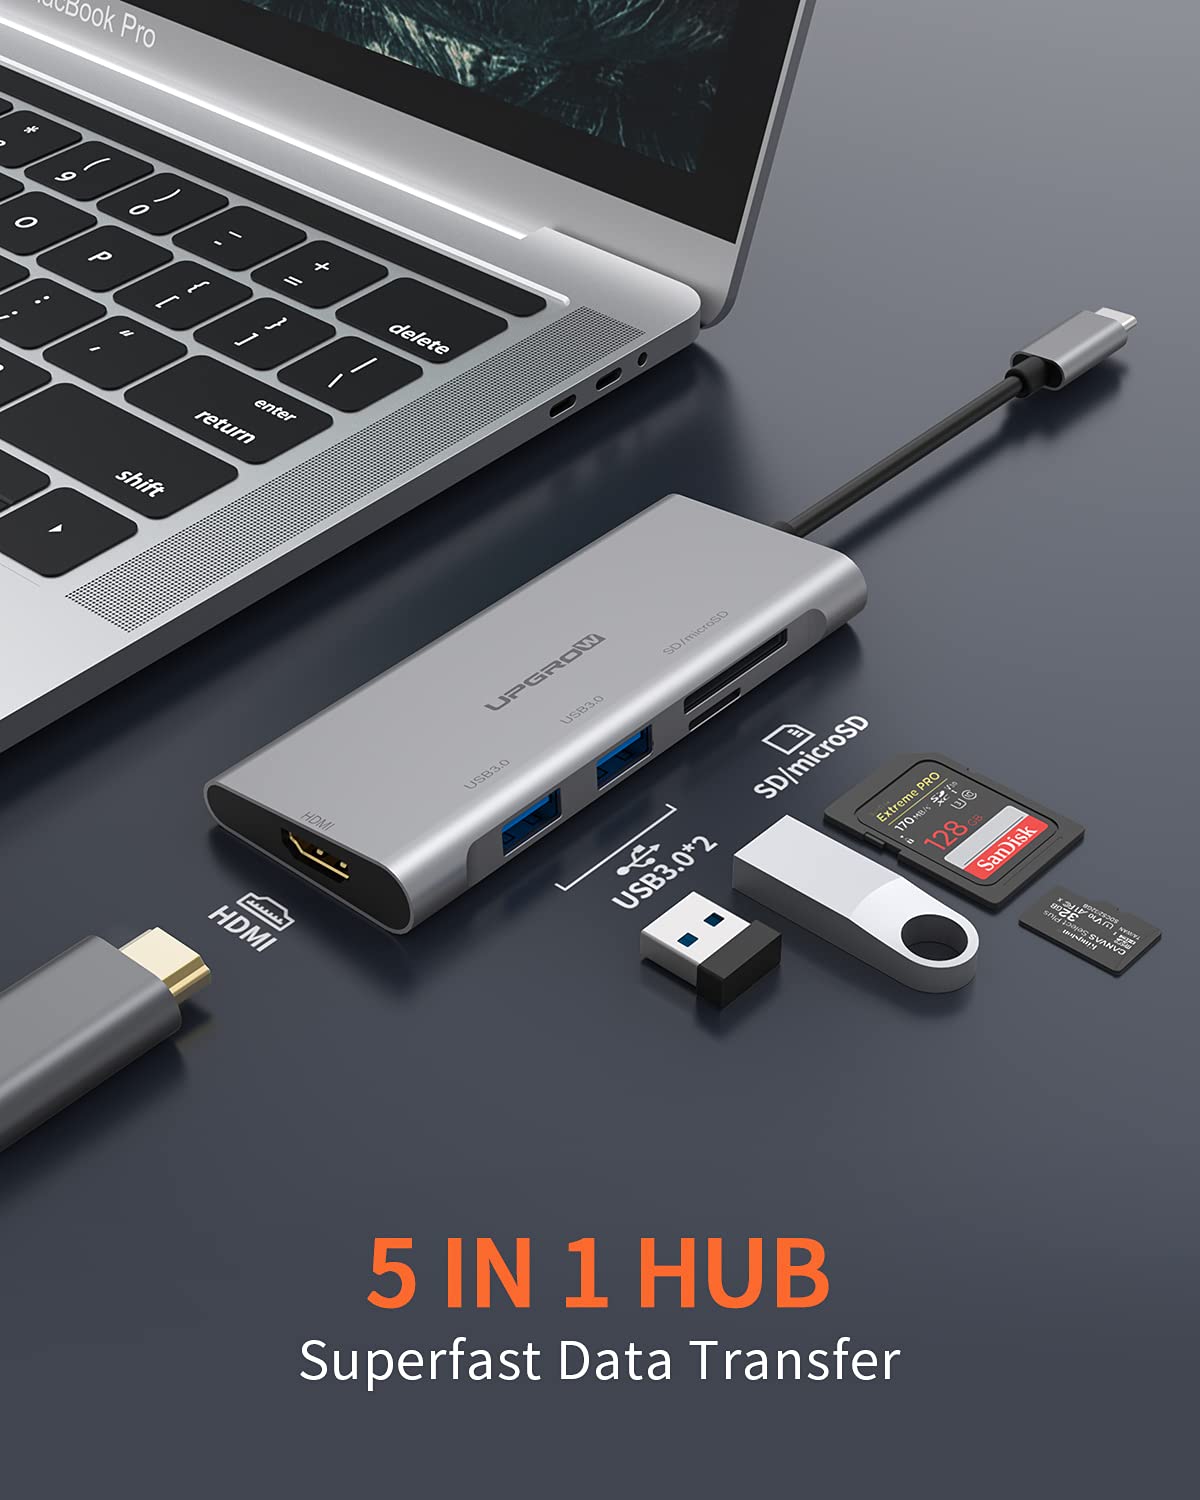 UPGROW USB C to HDMI Hub, Type C 5 in 1 Adapter with 2 USB 3.0 Ports, 4K@30Hz HDMI, SD/TF Card Reader, Compatible with MacBook Pro 2018-2020, ChromeBook, Dell XPS, Surface Go and Other C-Port Laptops